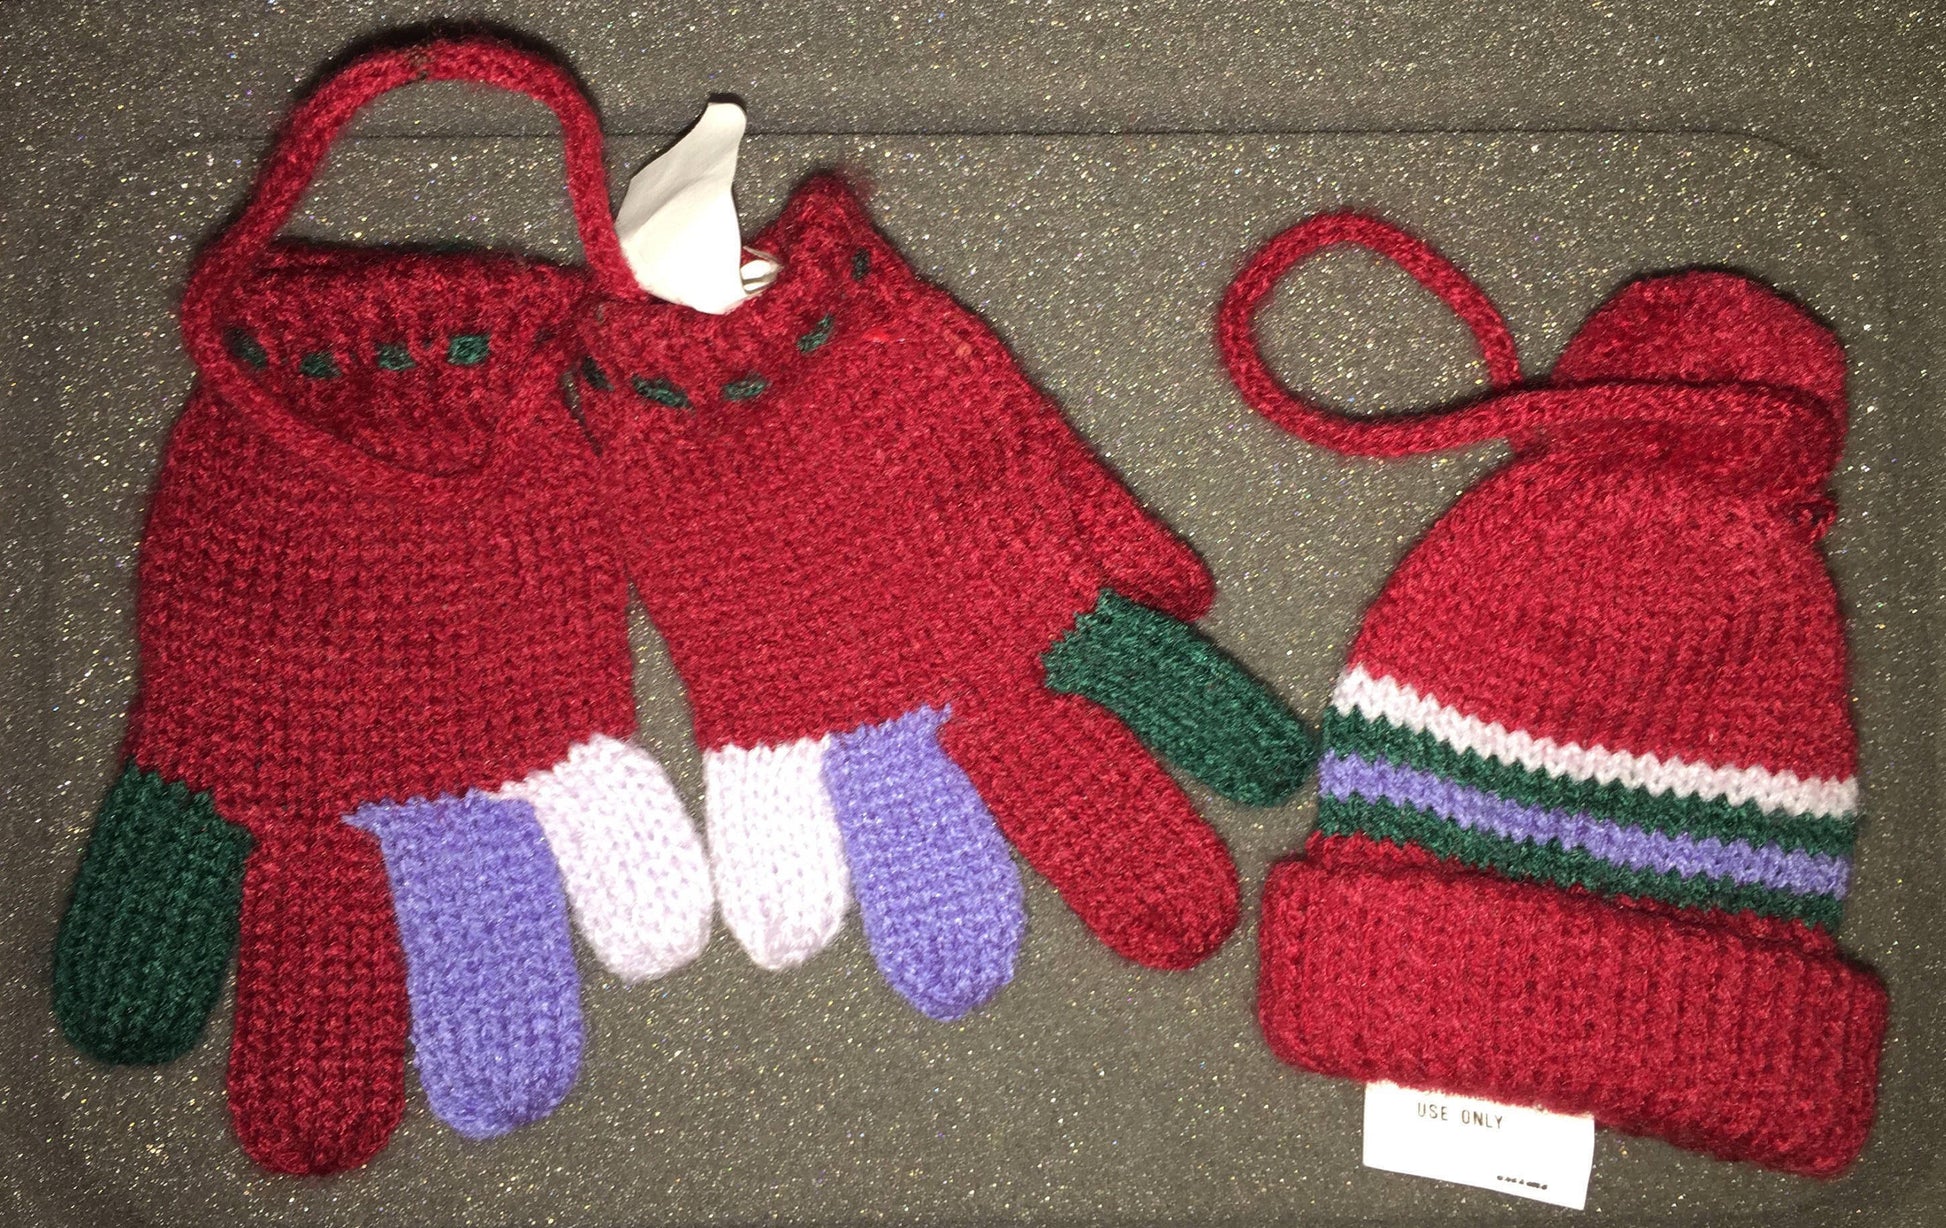 Department 56 Vintage very hard to find ornaments a pair of knitted gloves and a matching knitted  hat ornaments